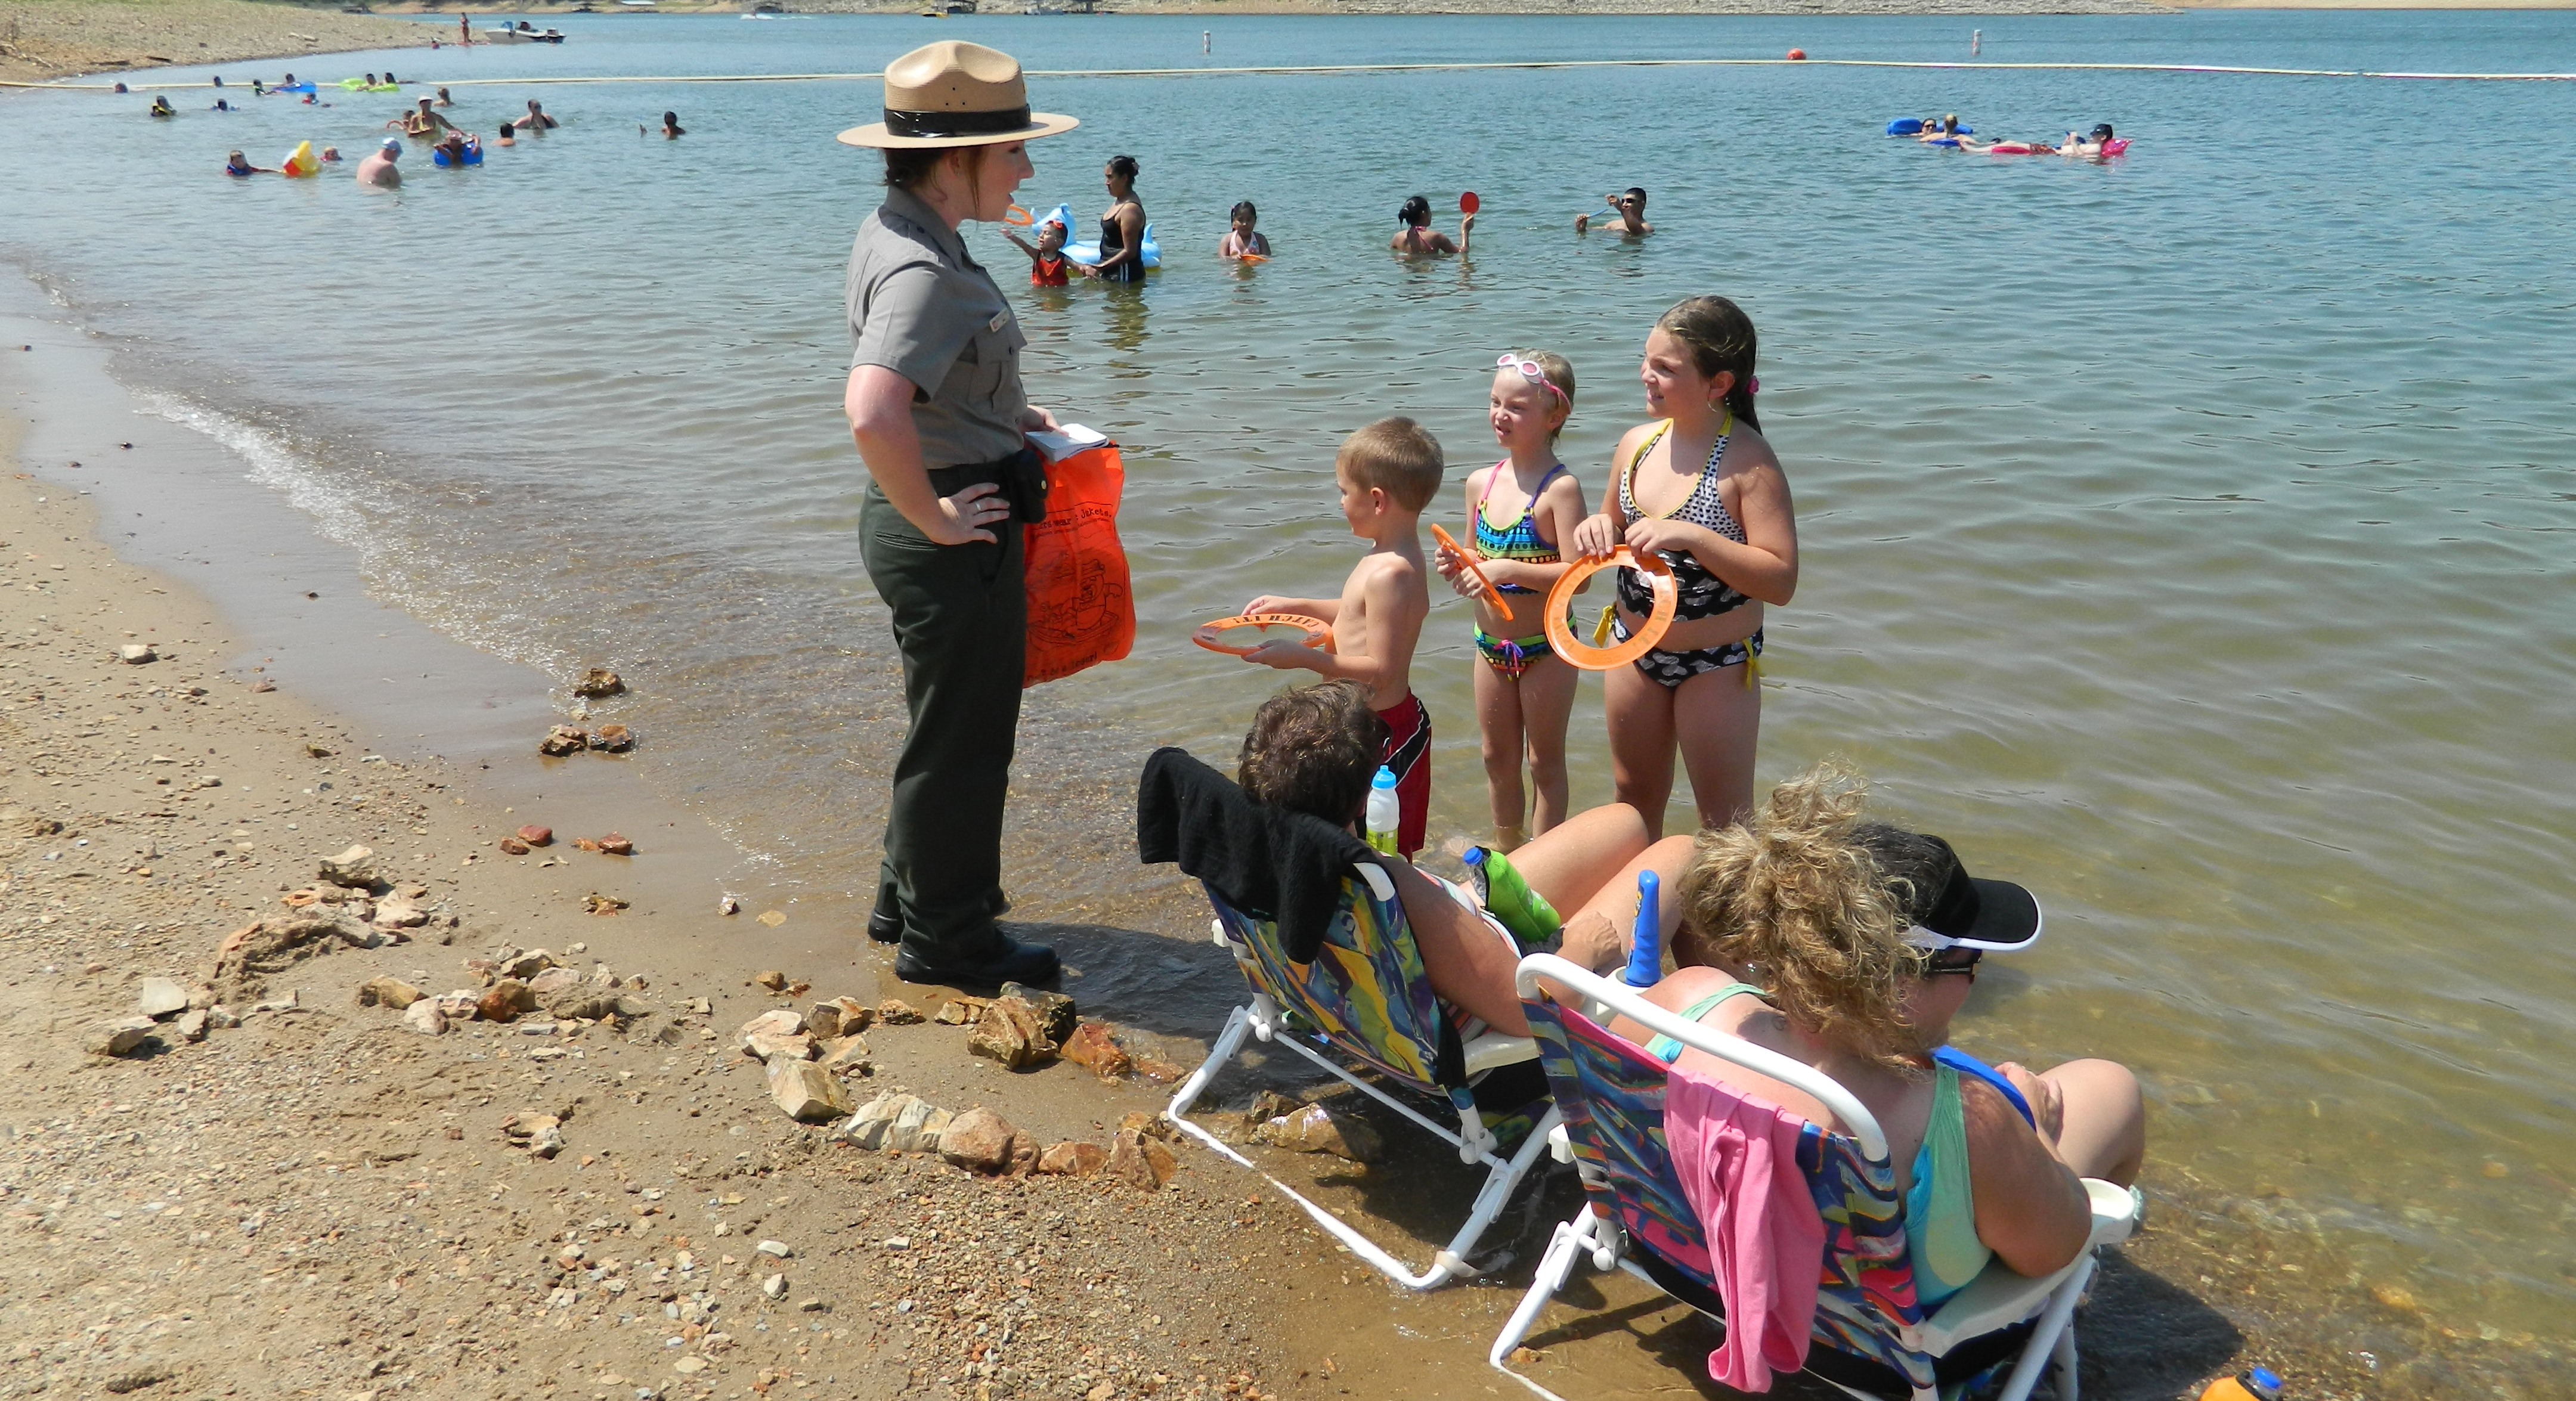 Ranger educating children about water safety